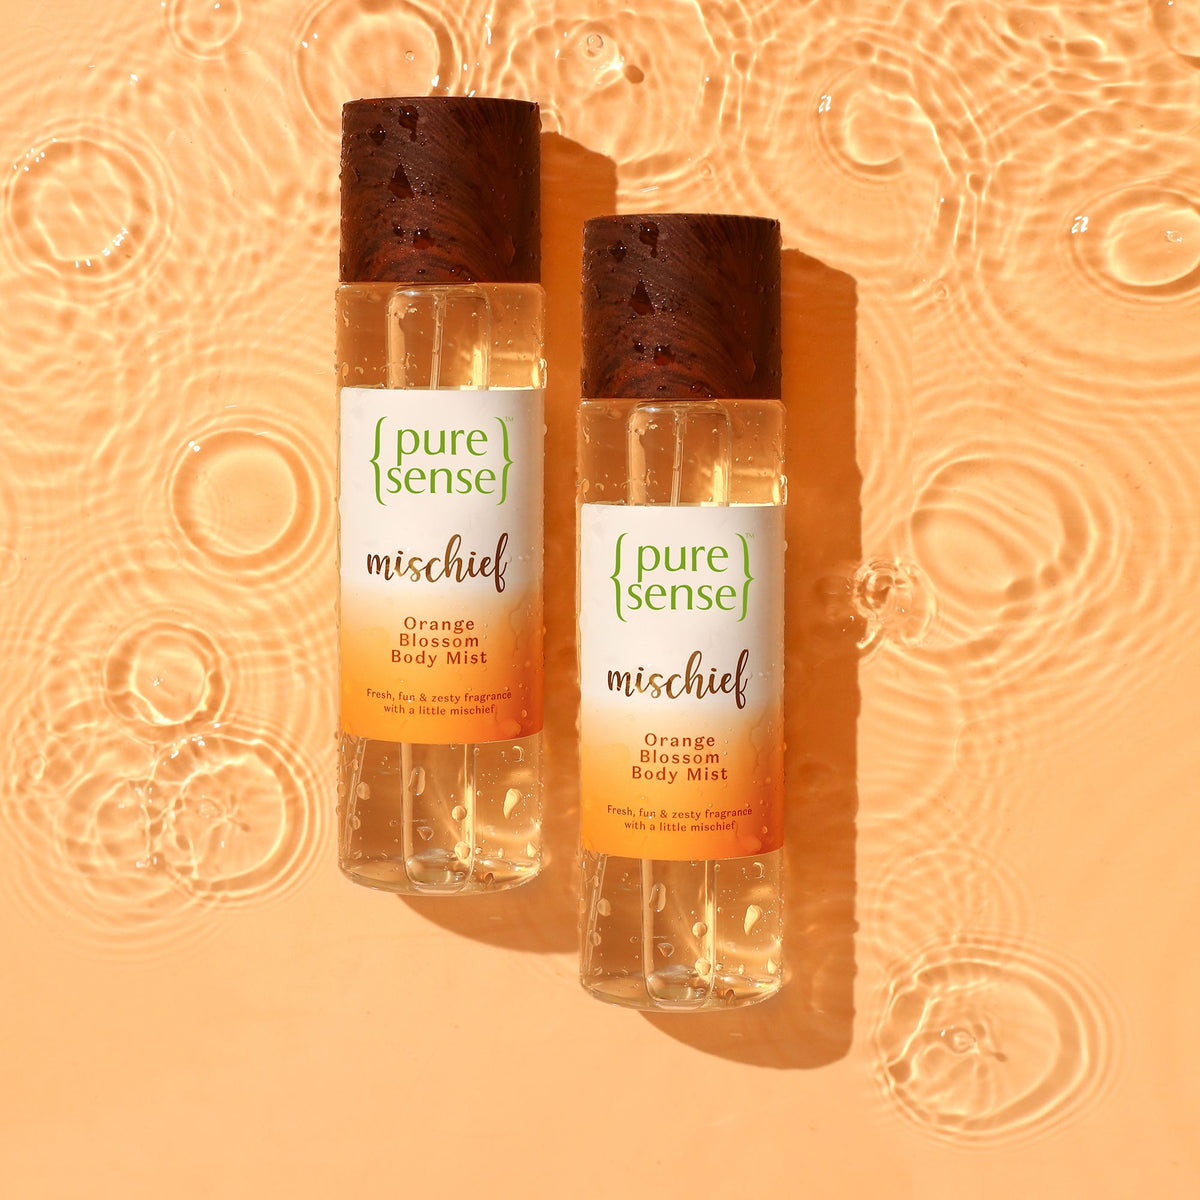 [JIO] Mischief Orange Blossom Body Mist (Pack of 2) | From the makers of Parachute Advansed | 300ml